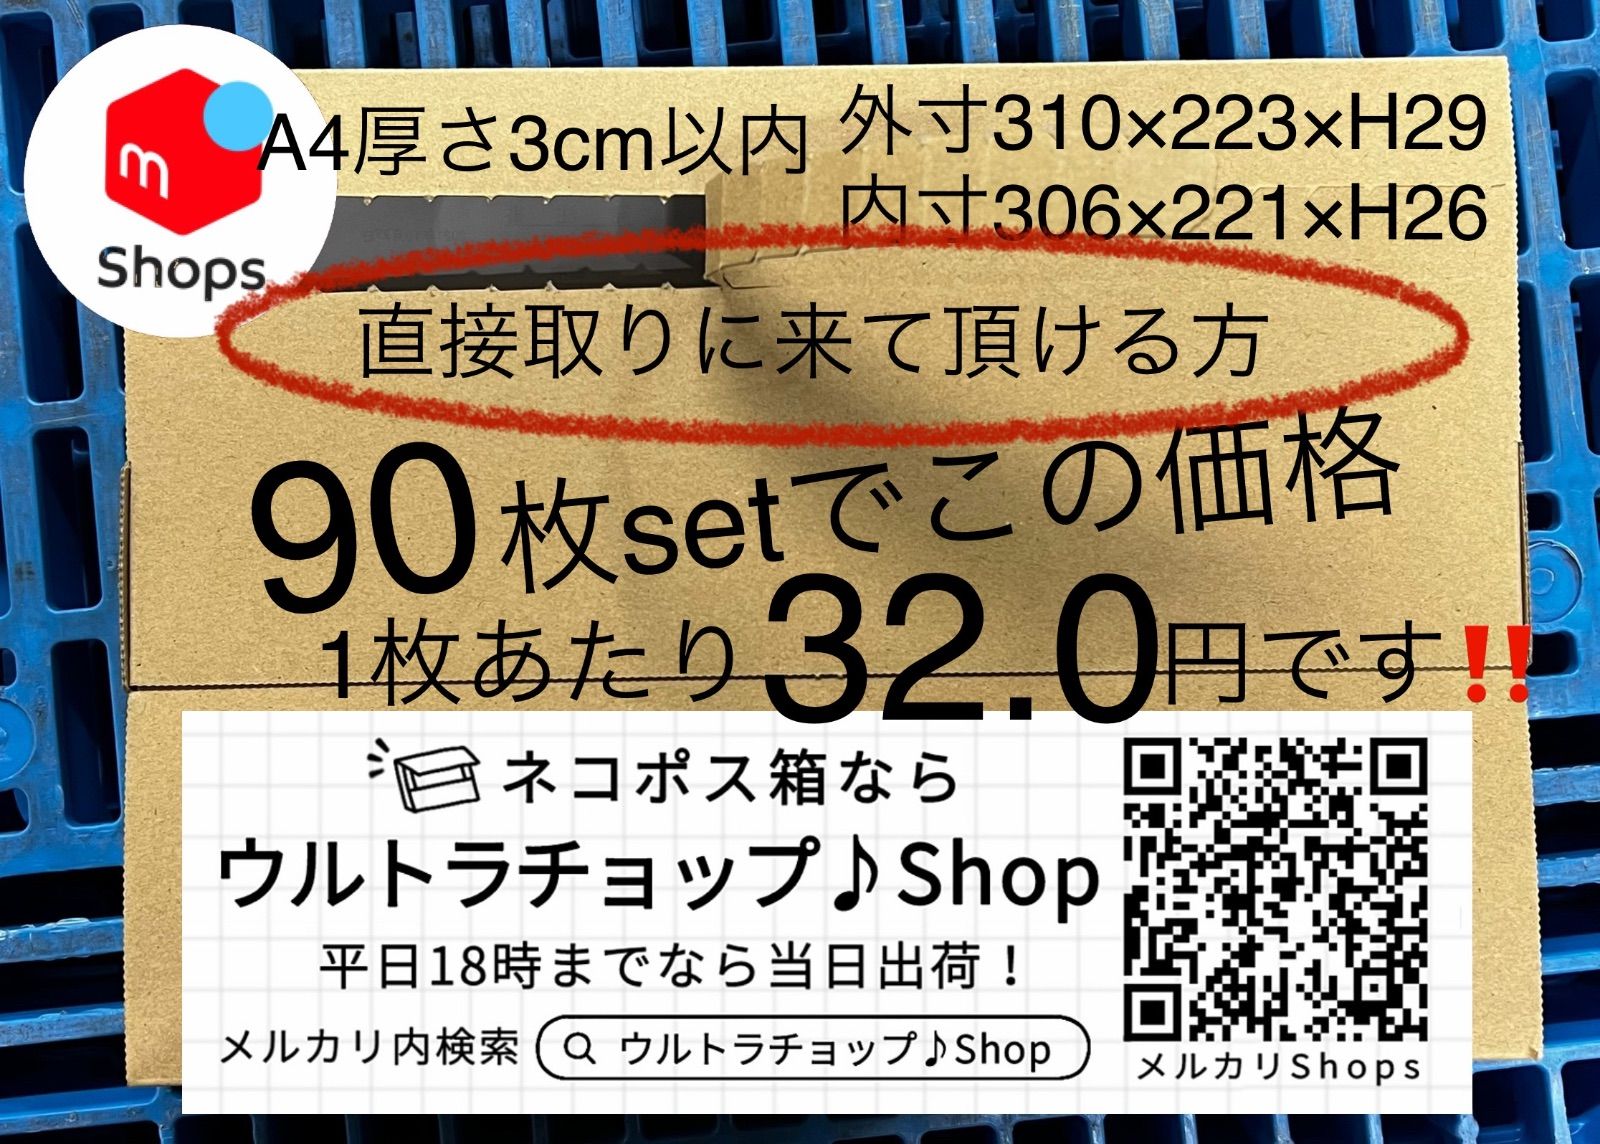 shop内にて320円！！